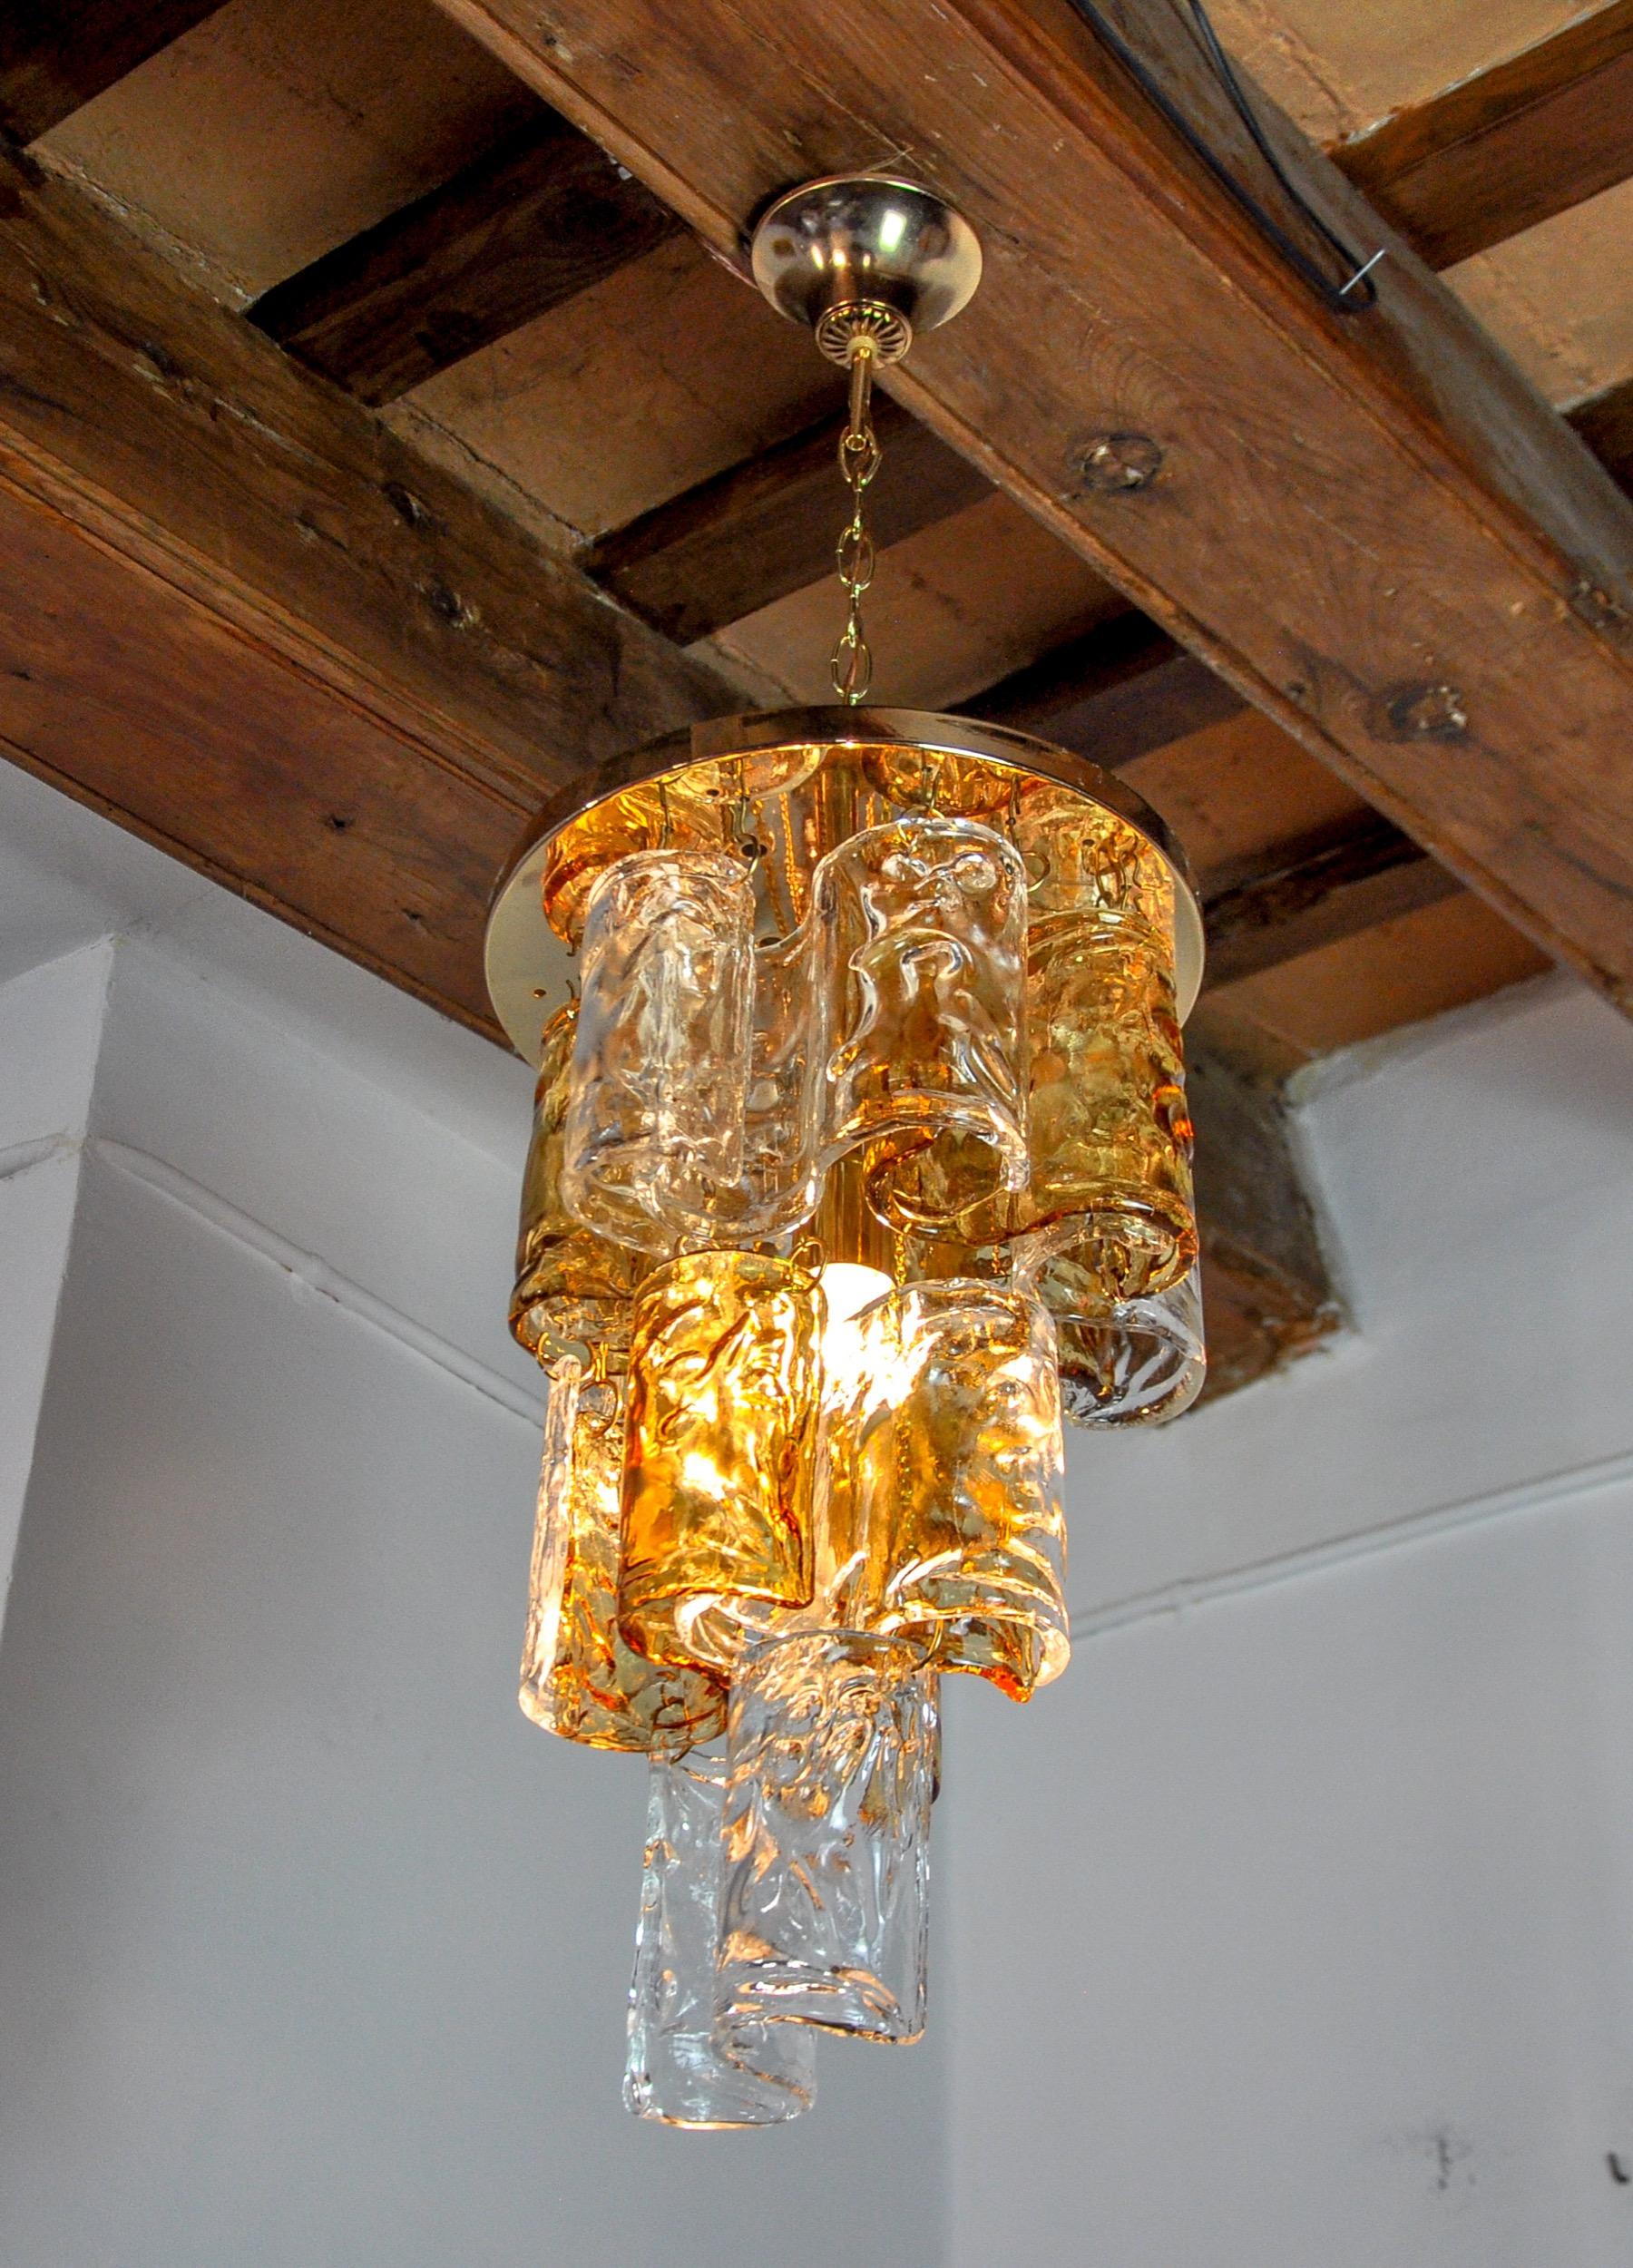 Superb and rare zero quattro chandelier designated and produced in the 70s in murano, italy. Golden structure and orange curved crystals spread over 3 levels in perfect condition. Rare design object that will illuminate your interior perfectly.